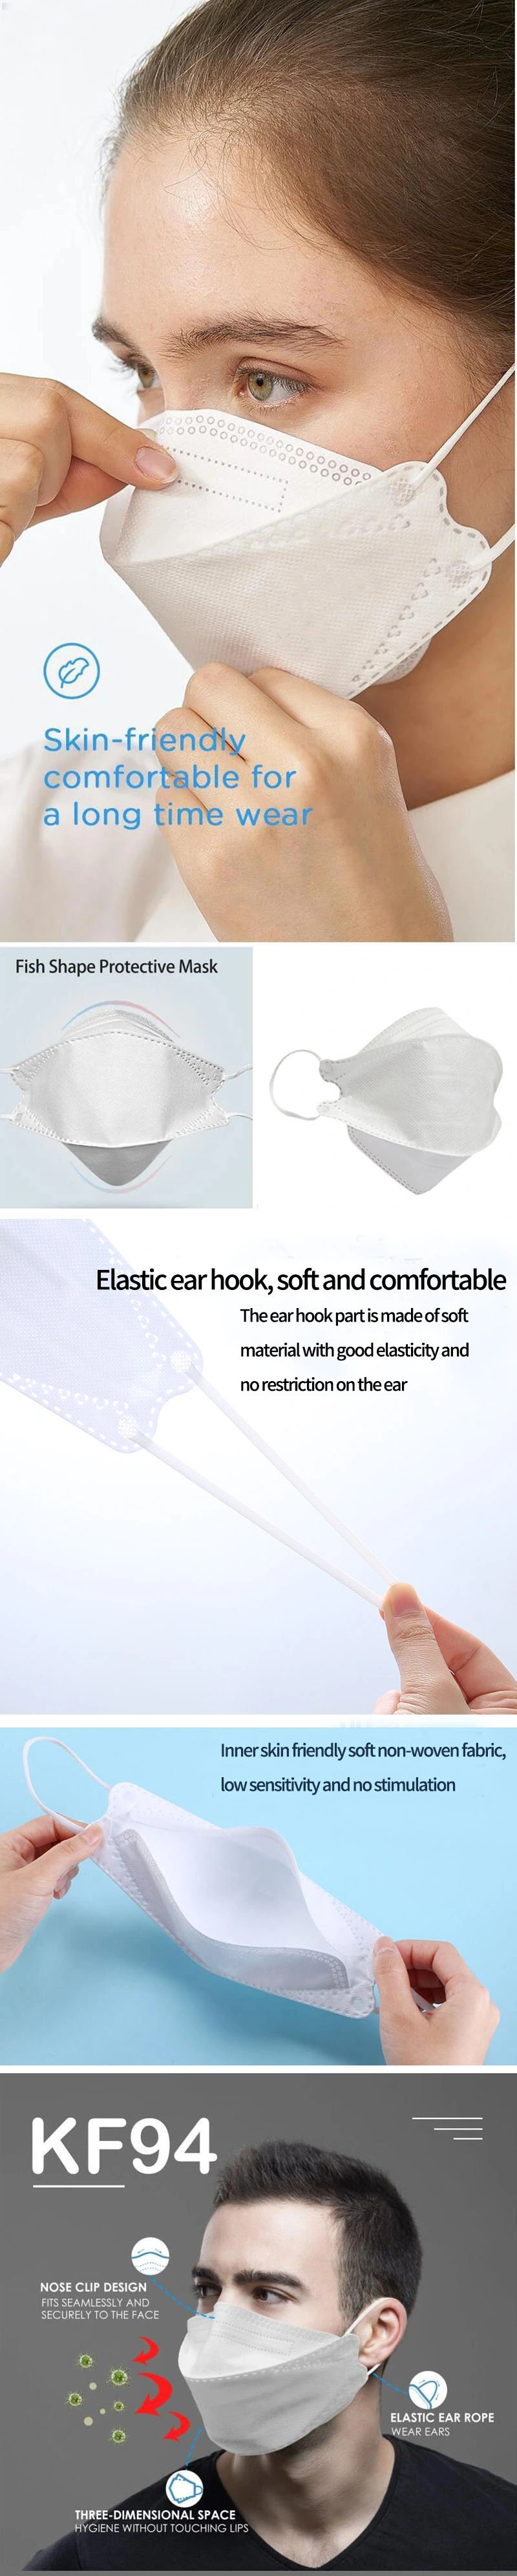 Factory Sales Fish Shaped Mask Filter Mask Disposable Particle Pollution Filter Mask CE FDA Certification